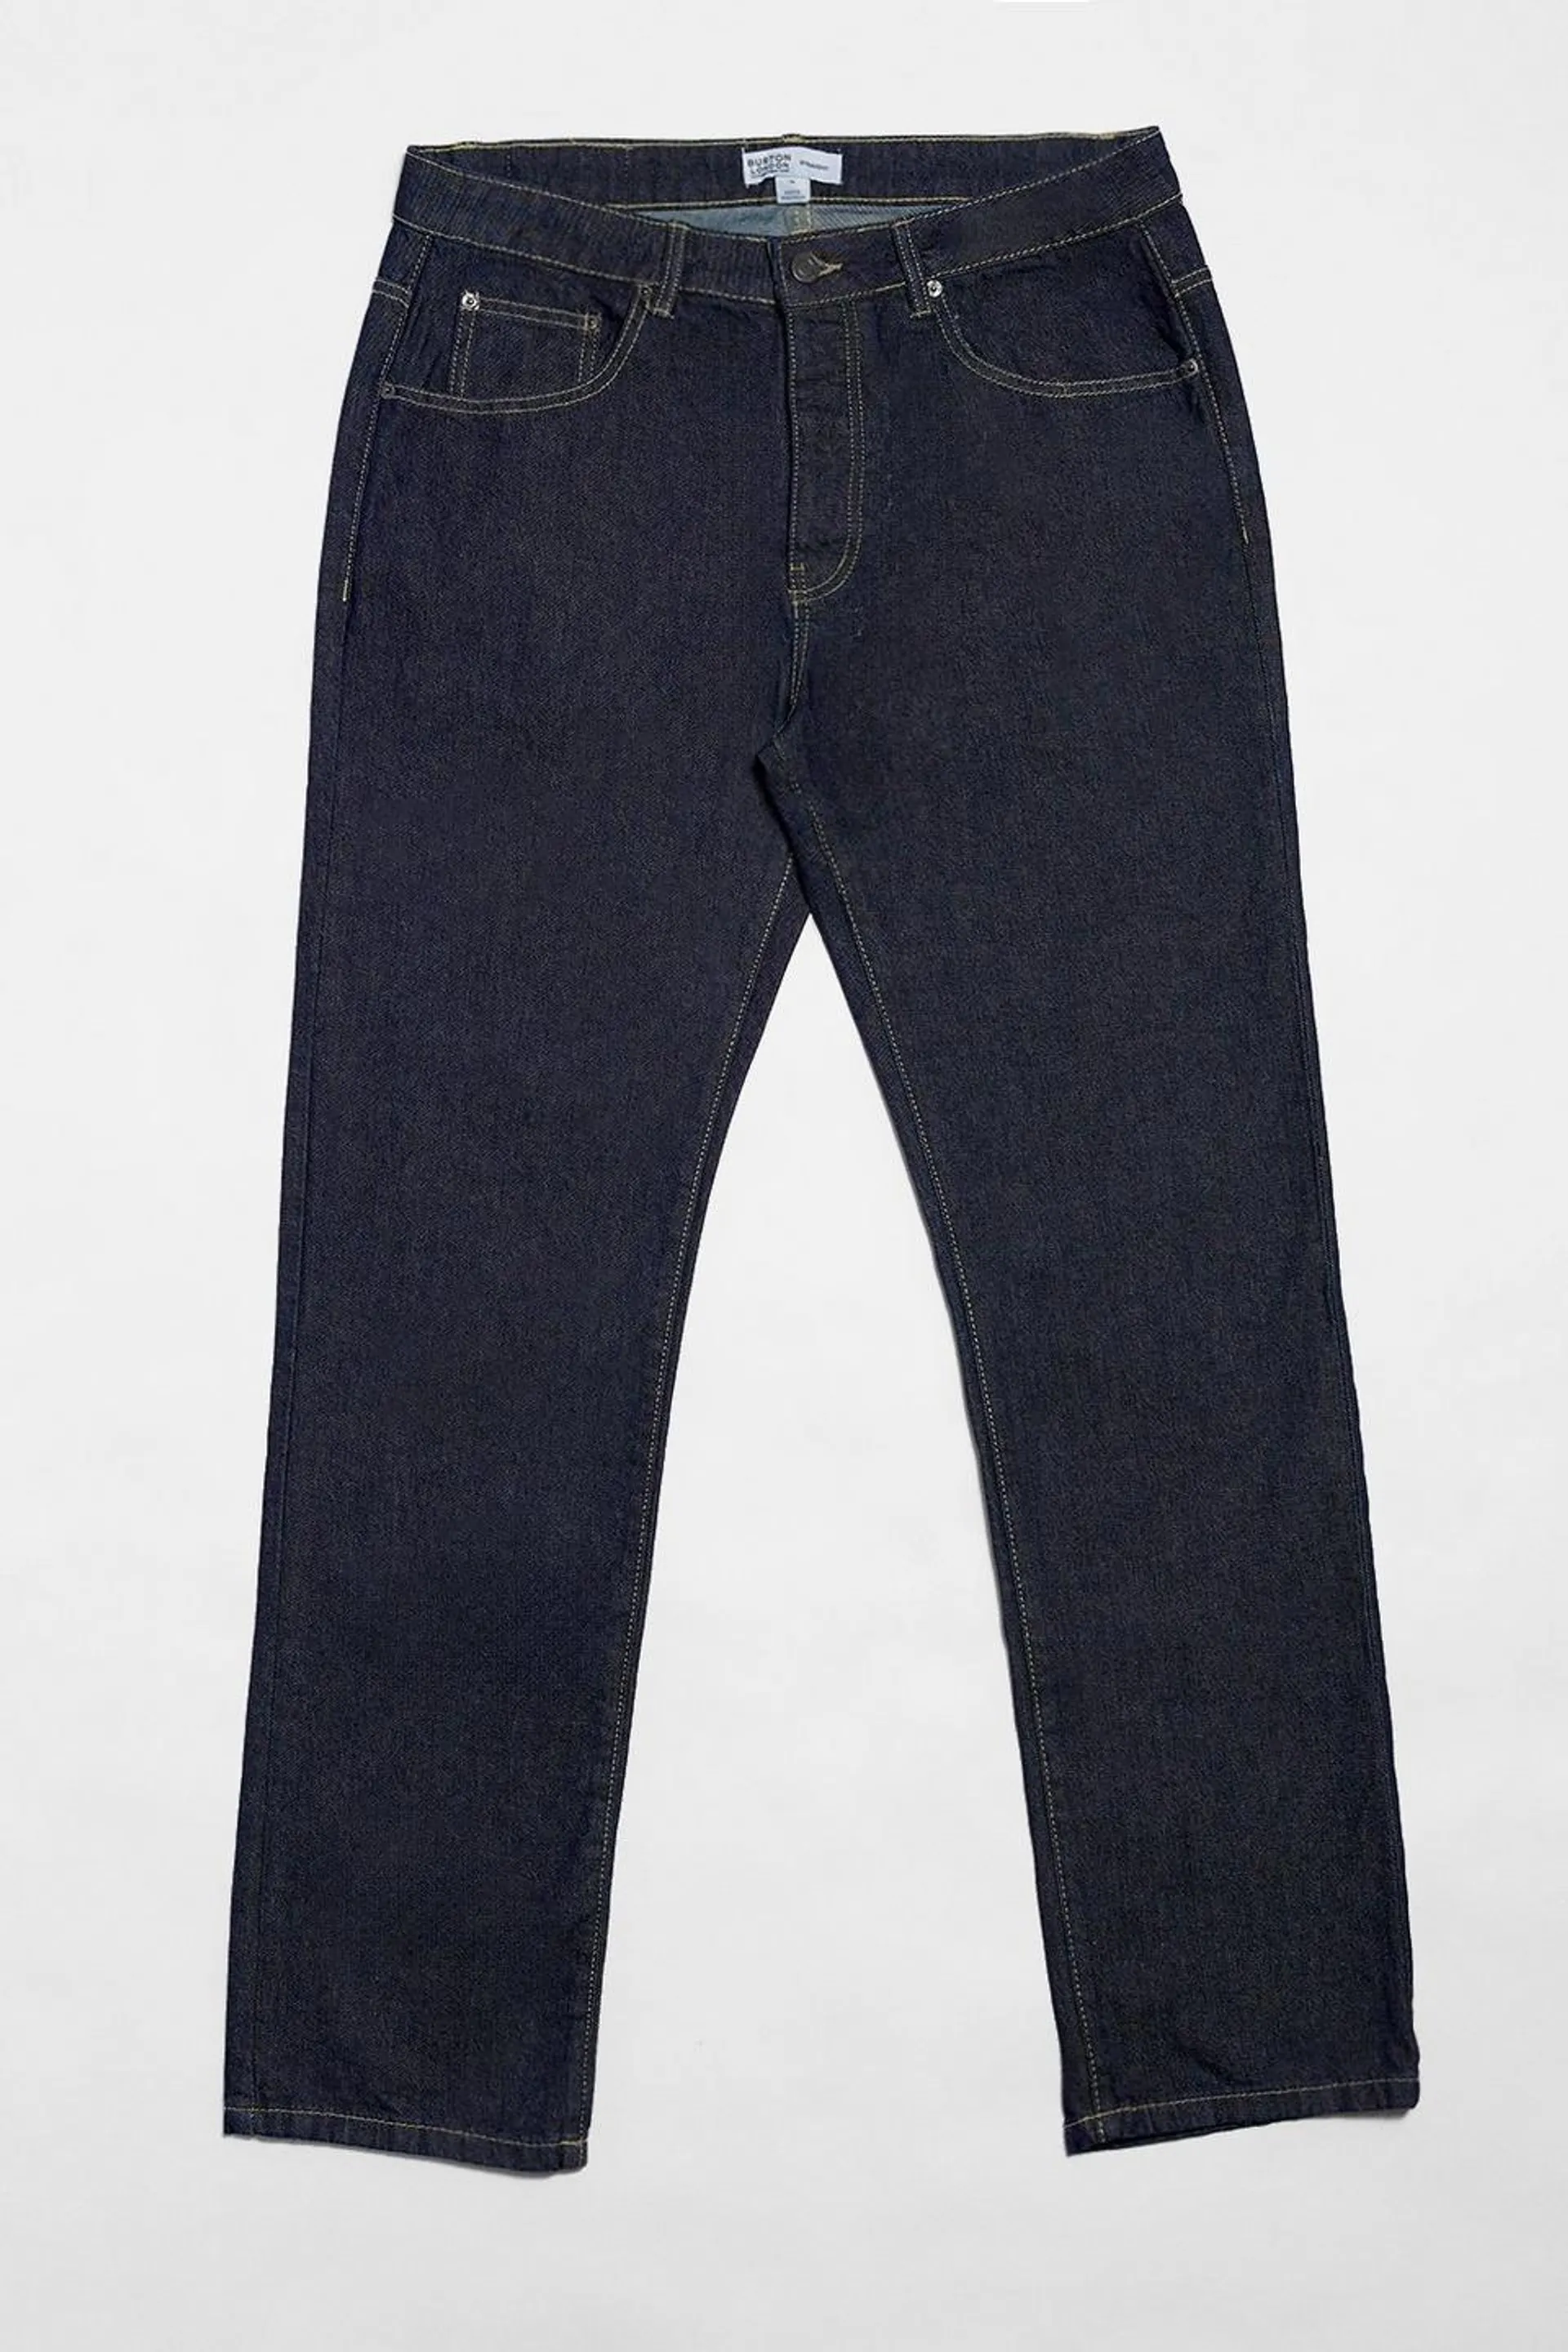 Rinse Straight Fit Jean